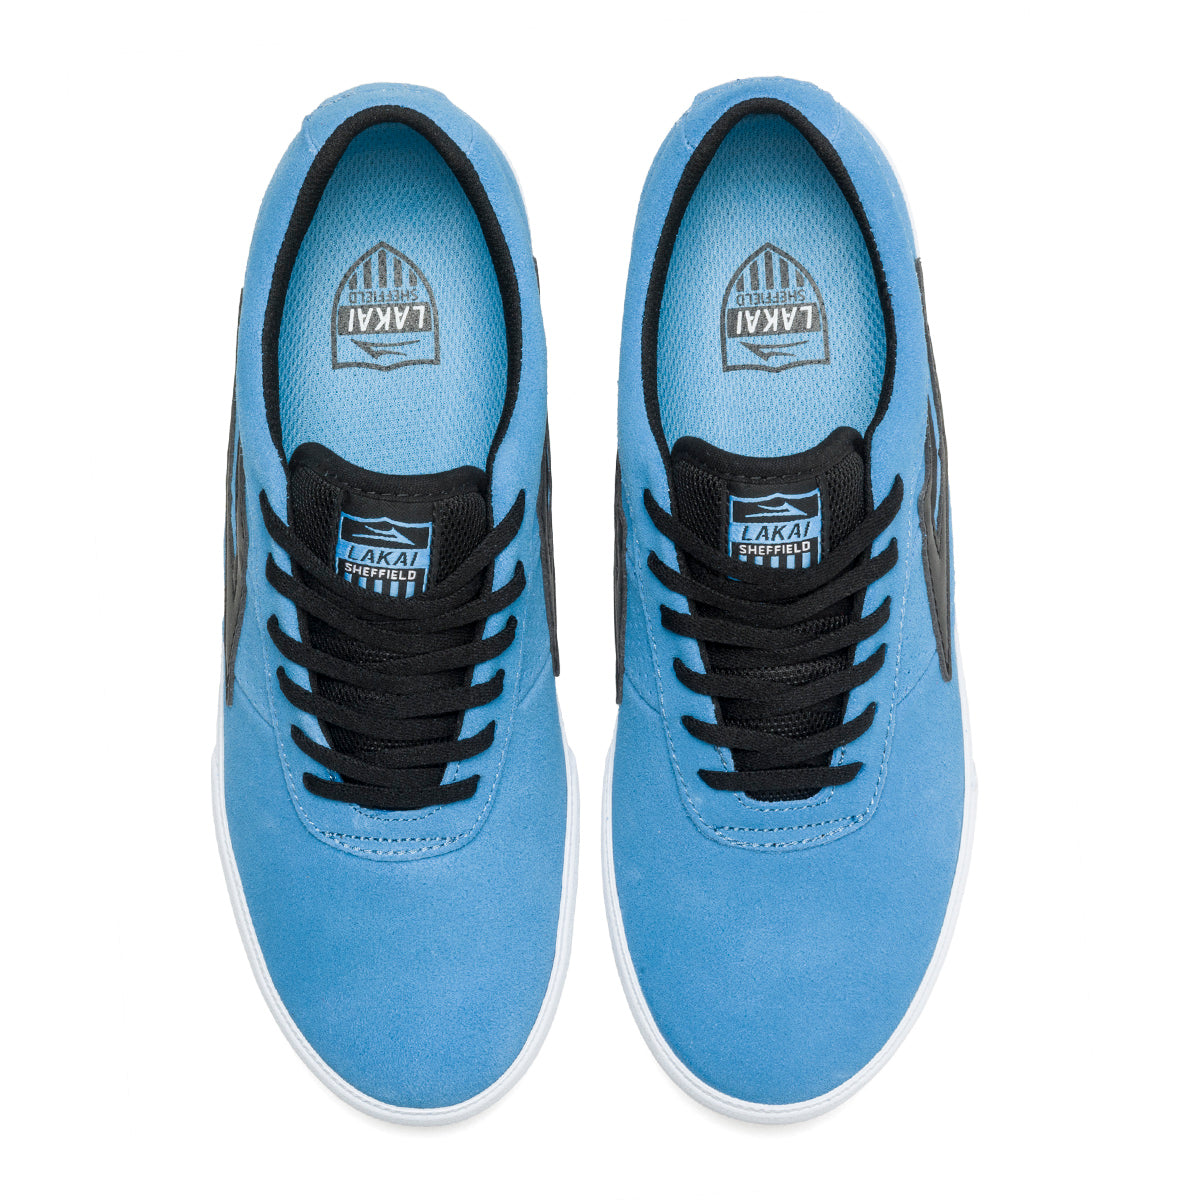 light blue and black shoes